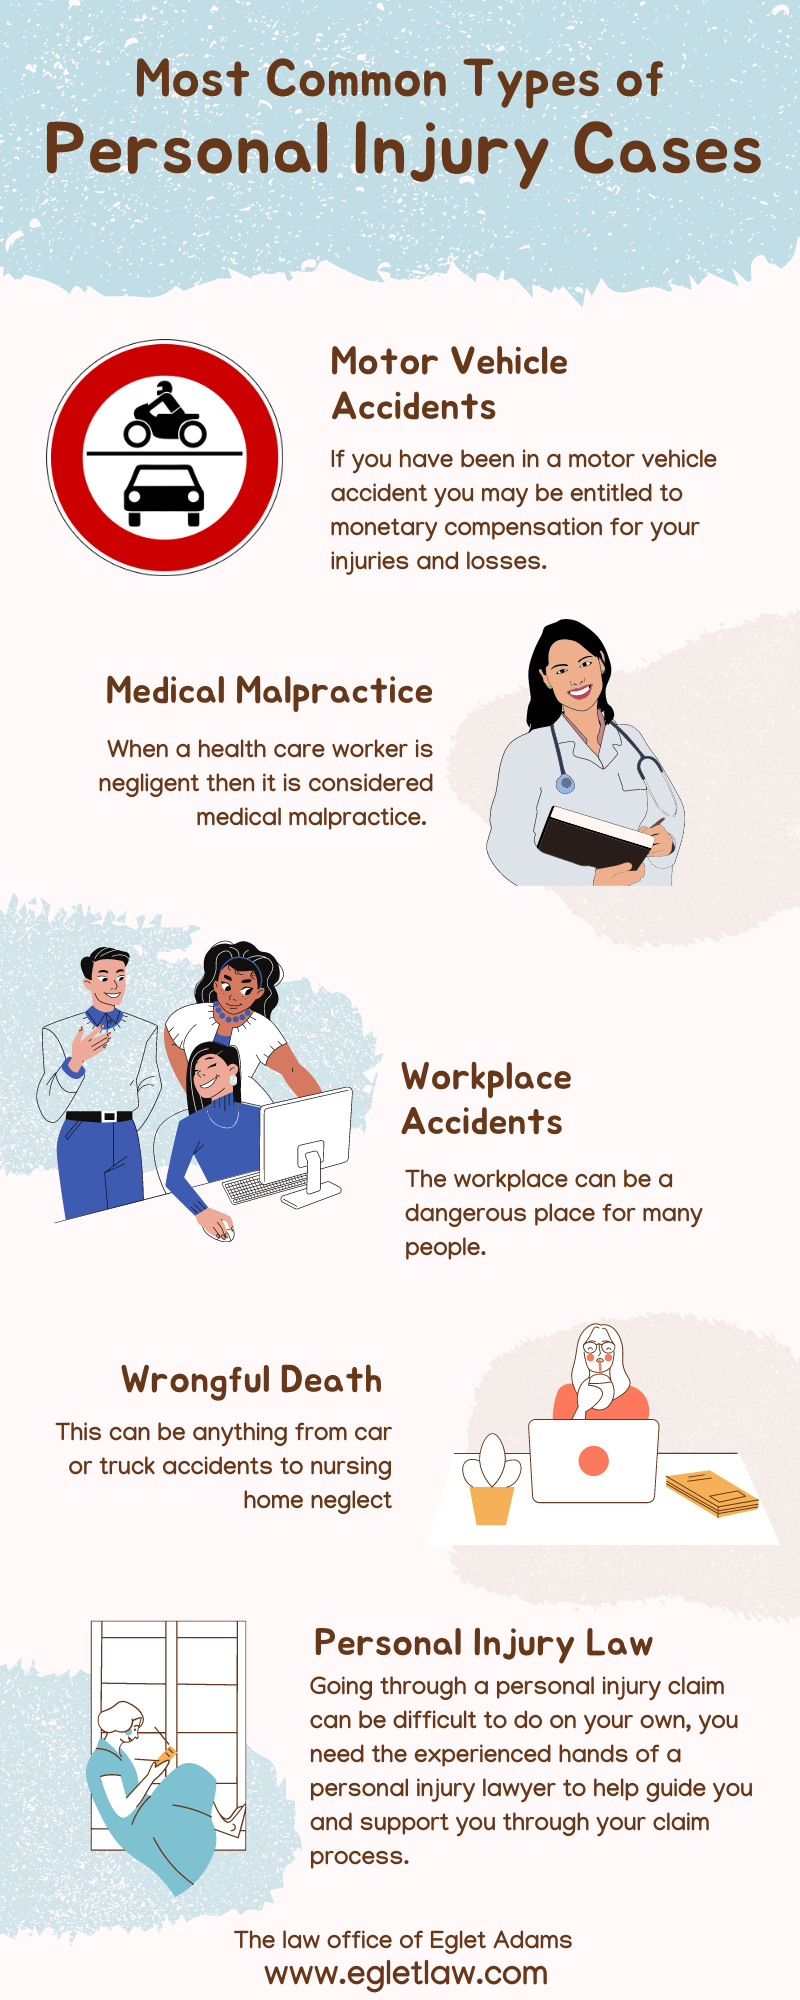 Most Common Types of Personal Injury Cases Infographic